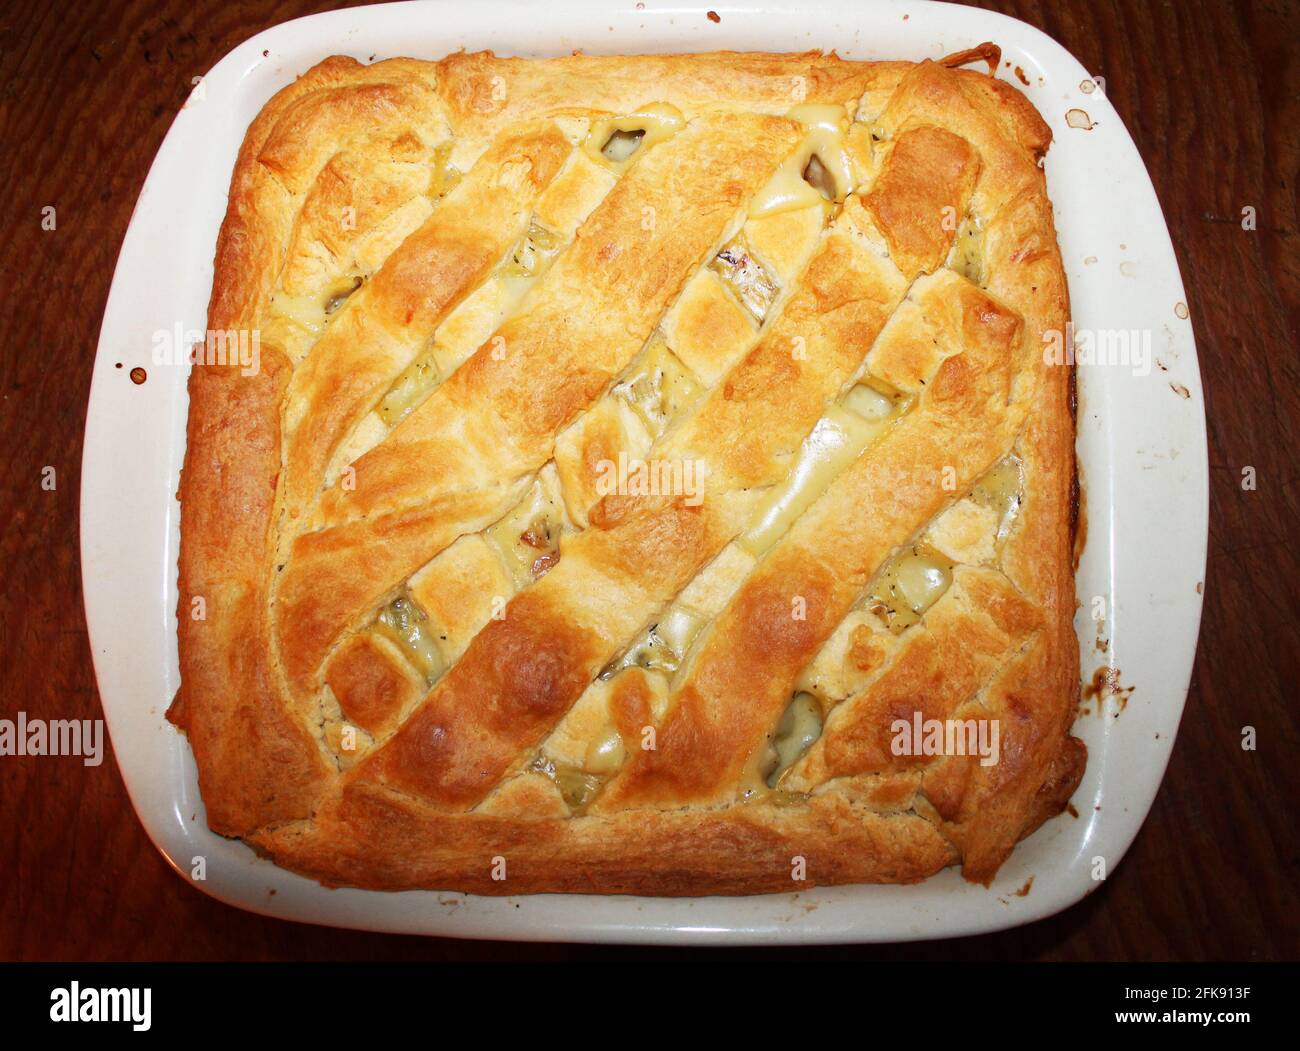 Close-up of a homemade chicken pot pie in a baking dish. Stock Photo